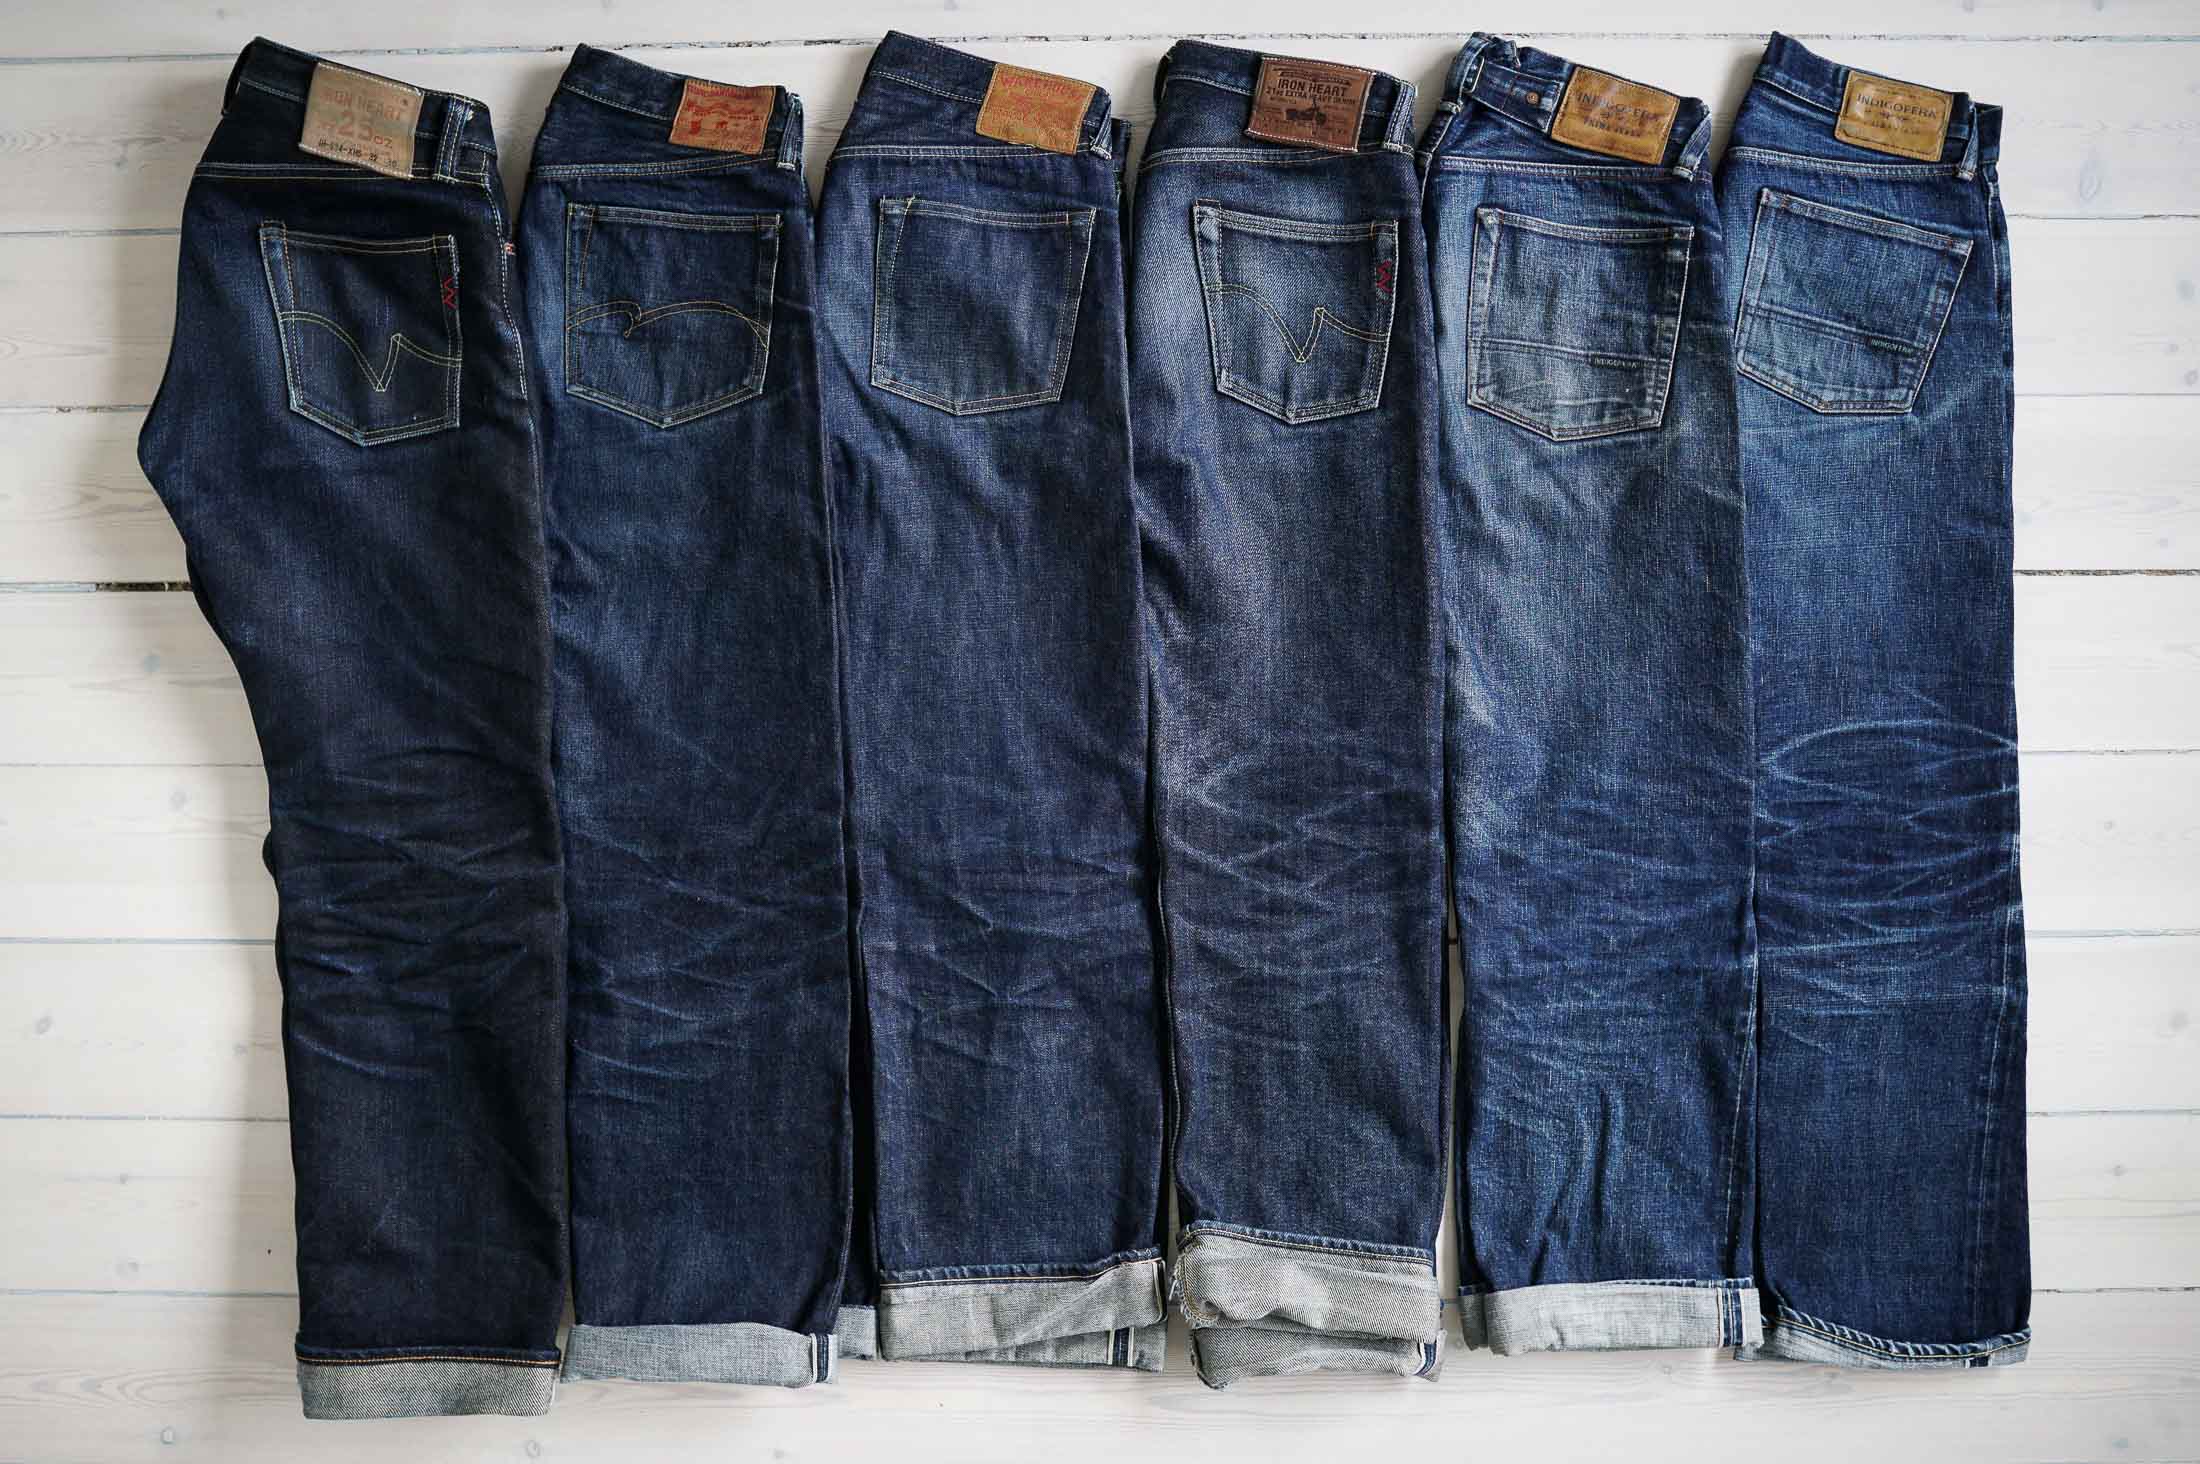 Denim Washing  Basic Steps and Guide  Denimandjeans  Global Trends  News and Reports  Worldwide